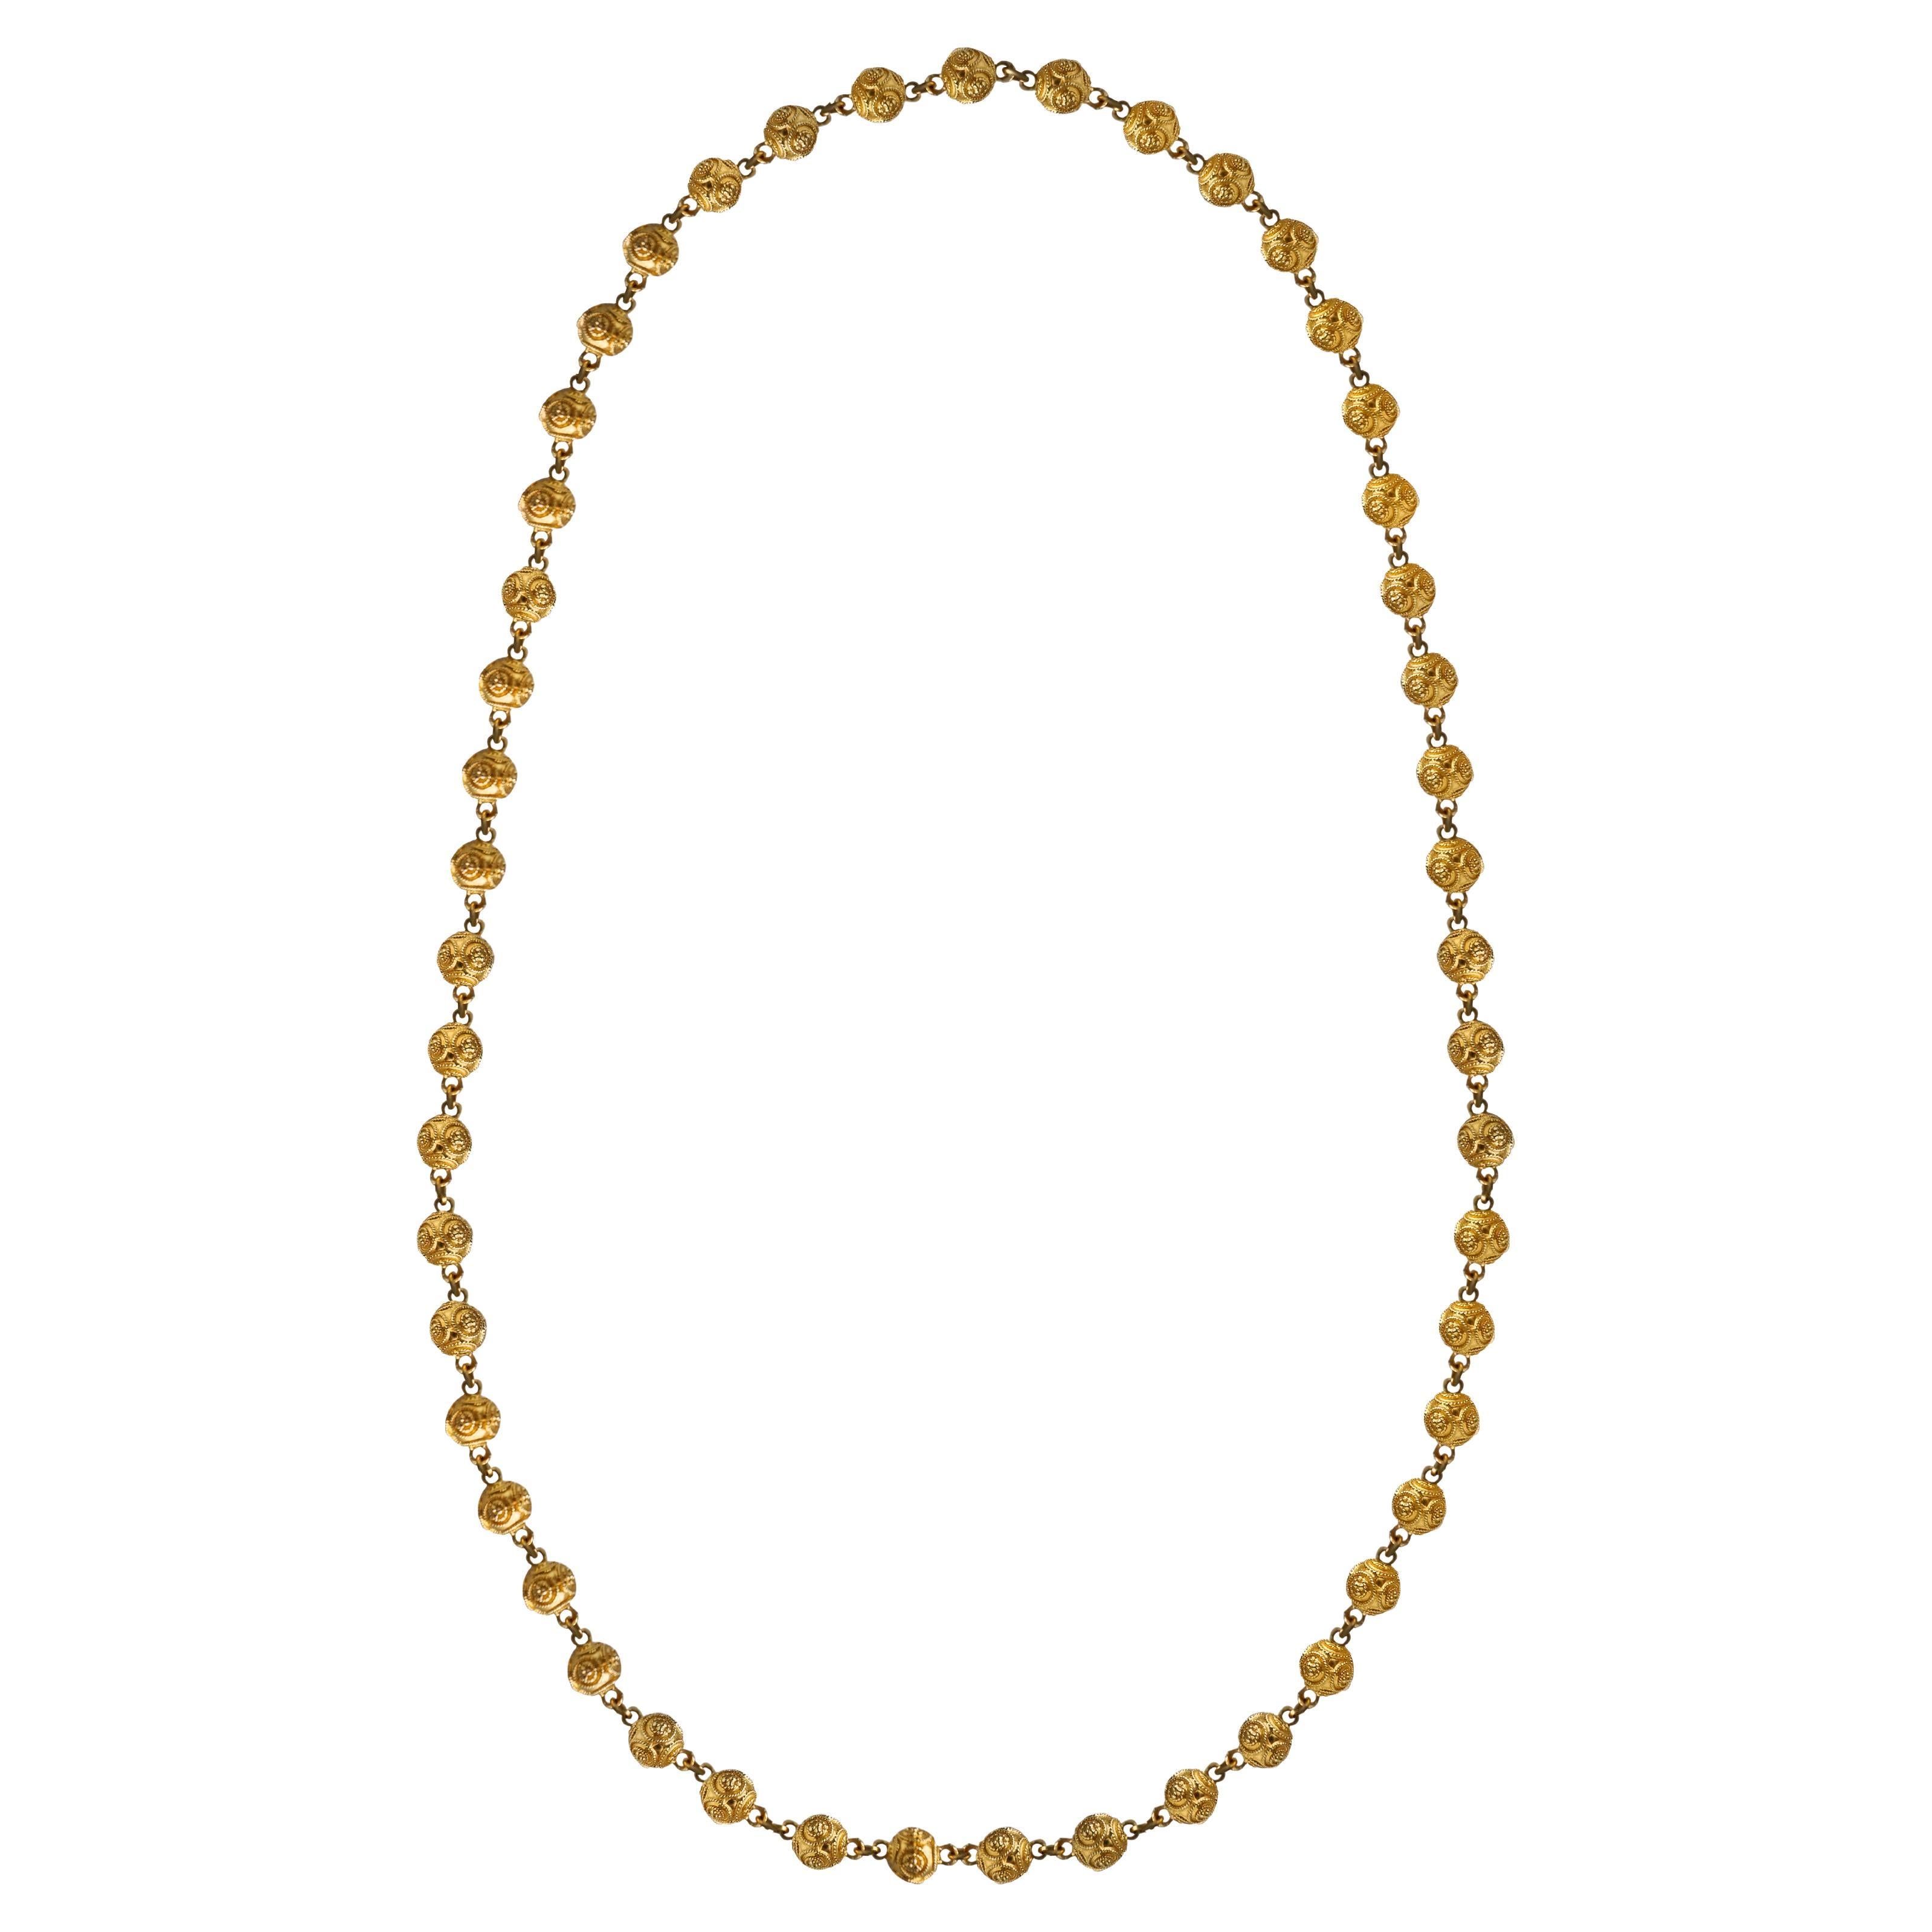 18K Solid Gold Ball Etruscan Revival Necklace. Unique design links 51 yellow gold balls together in an oval spring ring with no open clasp.
Gold ball dimensions: 7.48 mm long x 9 mm wide.
Necklace dimensions: 32 inches/81.5 cm.
Total weight: 101